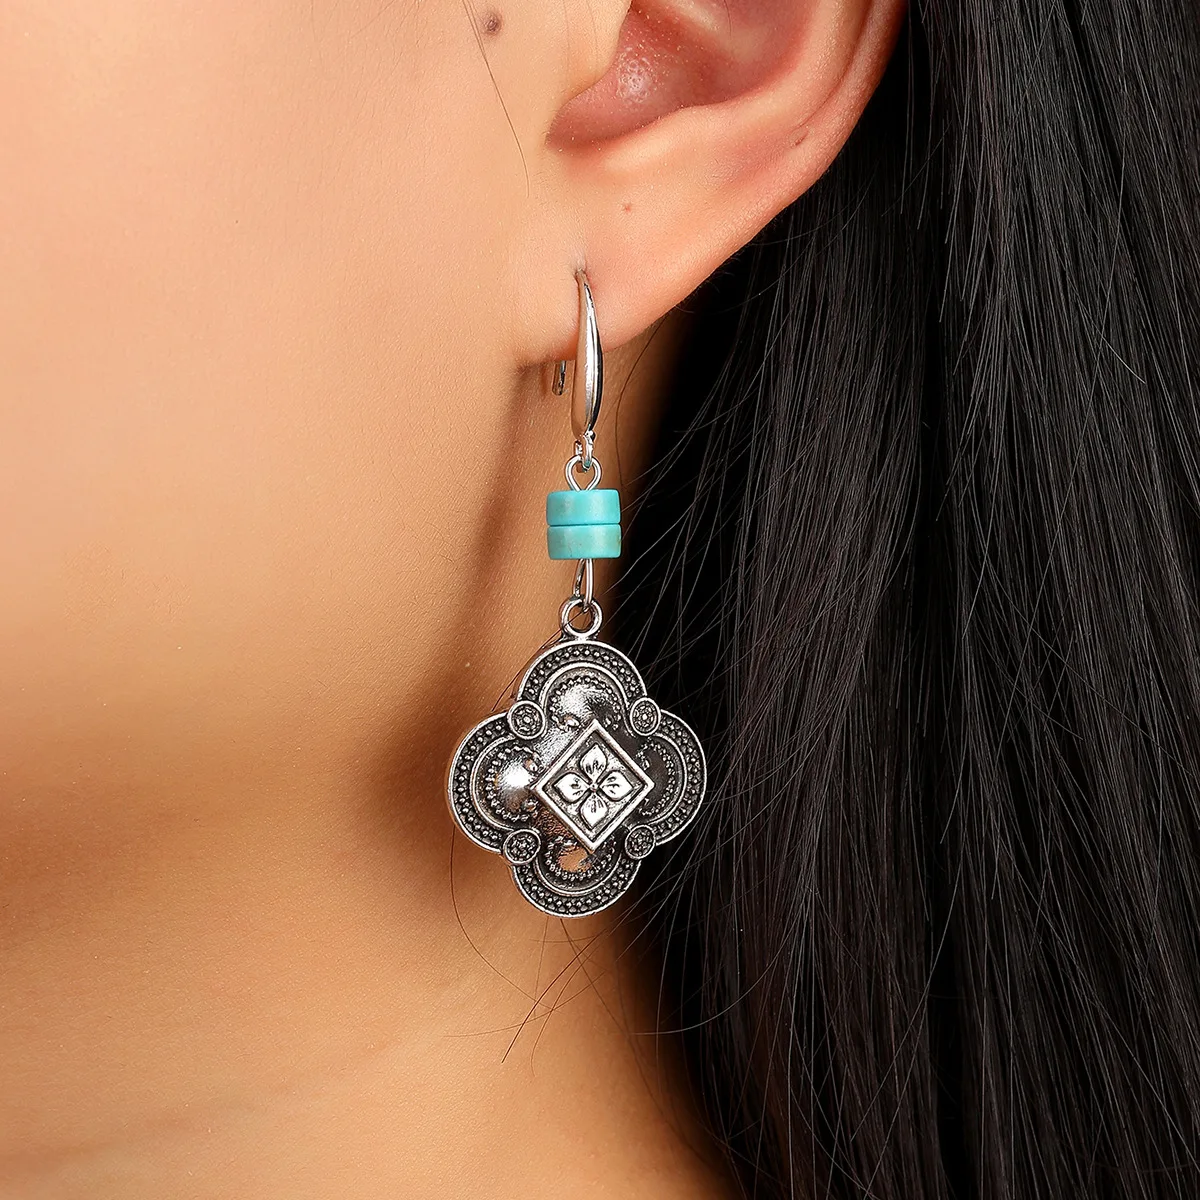 

Antique Silver Turquoise Cactus Bull Head Water Drop Earrings Western Ethnic Jewelry Geometric Celtic Knotwork Earring Wholesale